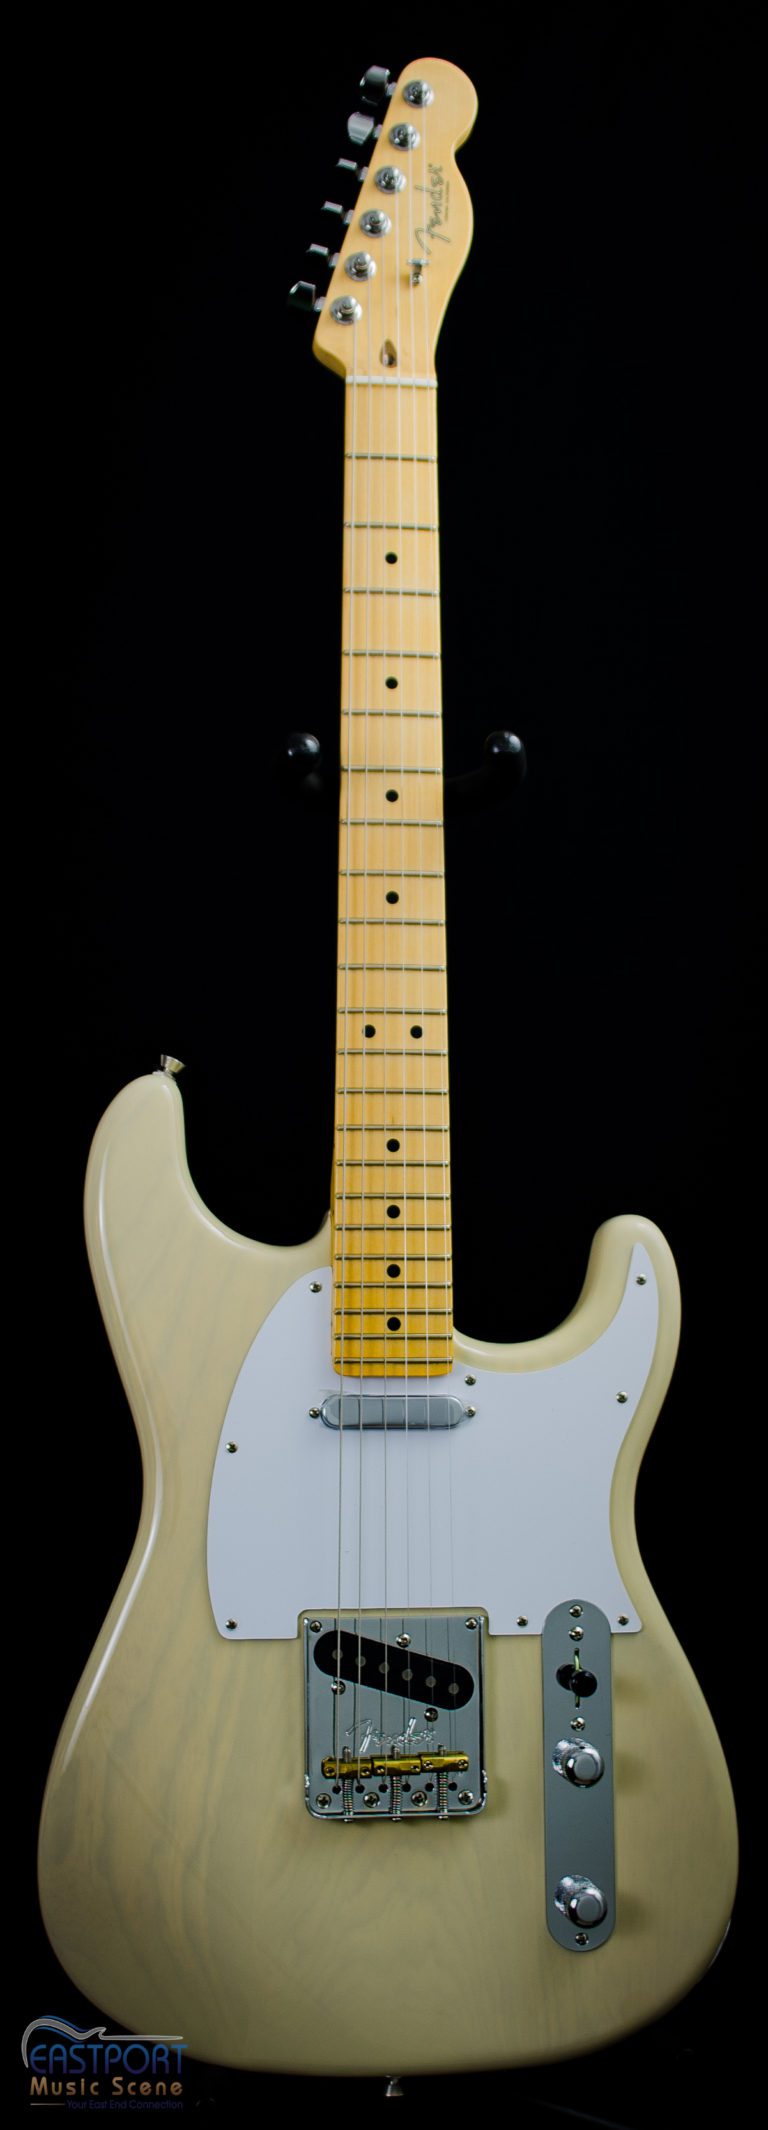 A white electric guitar with black and yellow neck